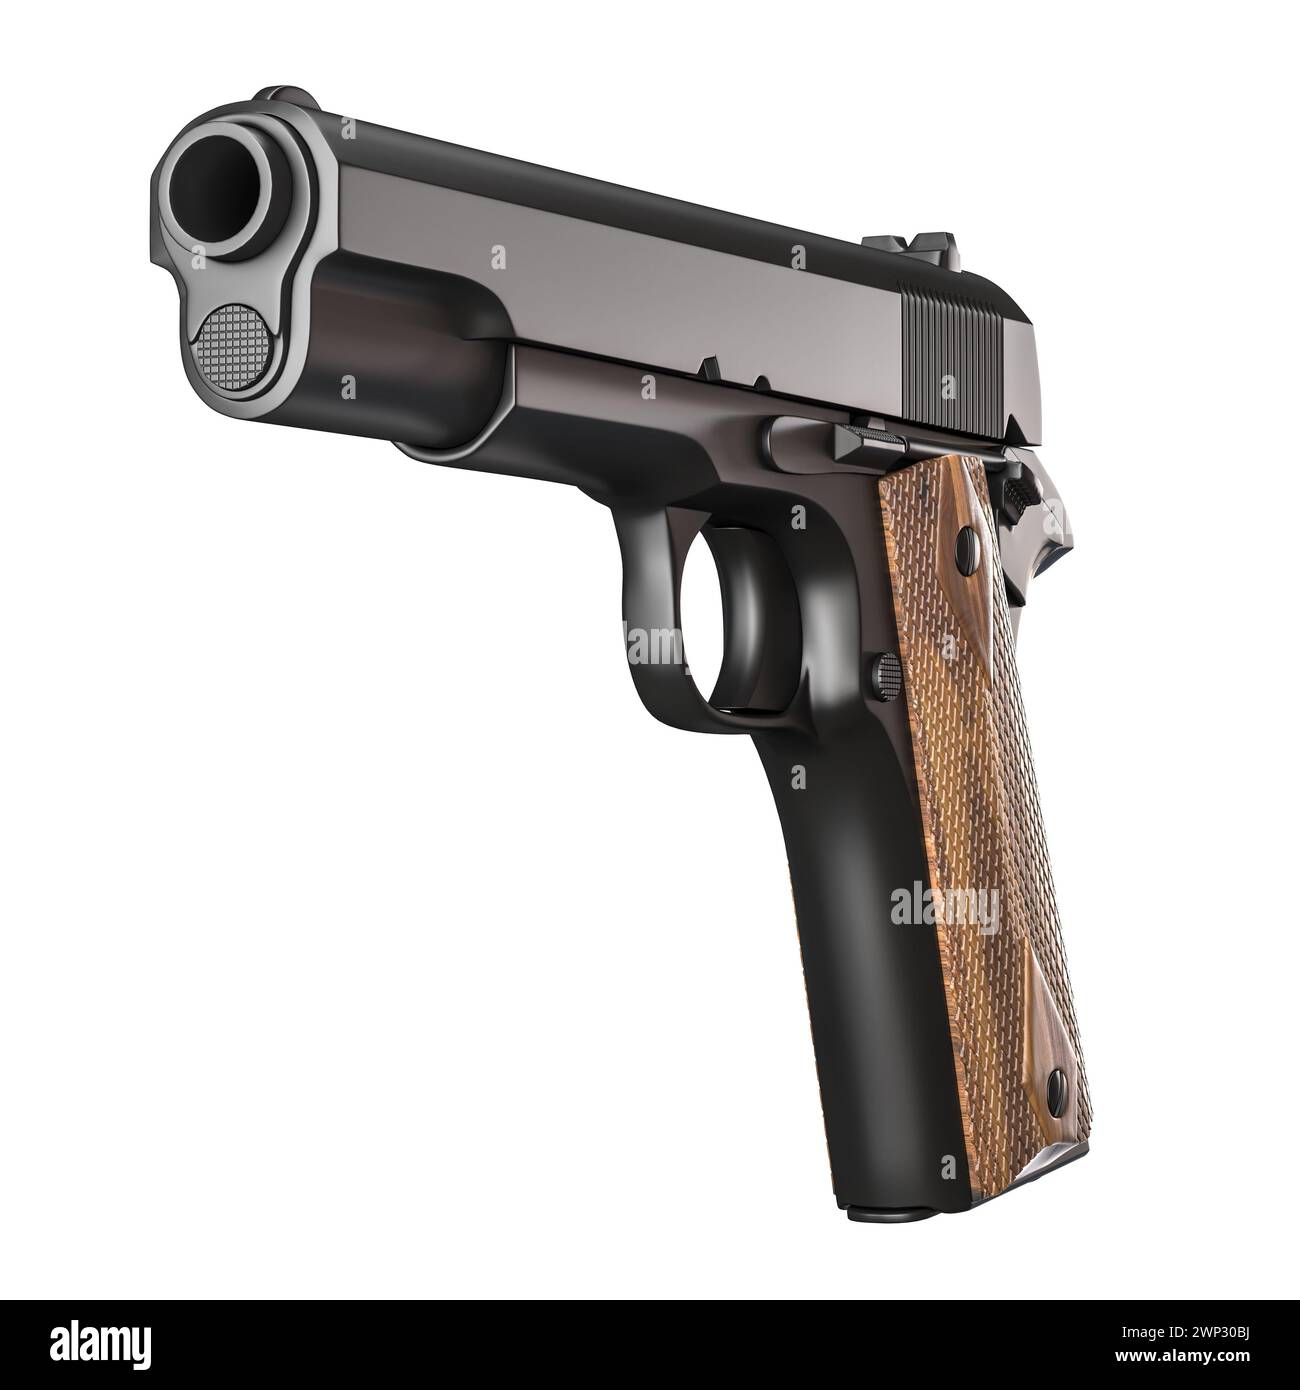 Realistic illustration of a black handgun with wooden grip detail. 3d render Stock Photo